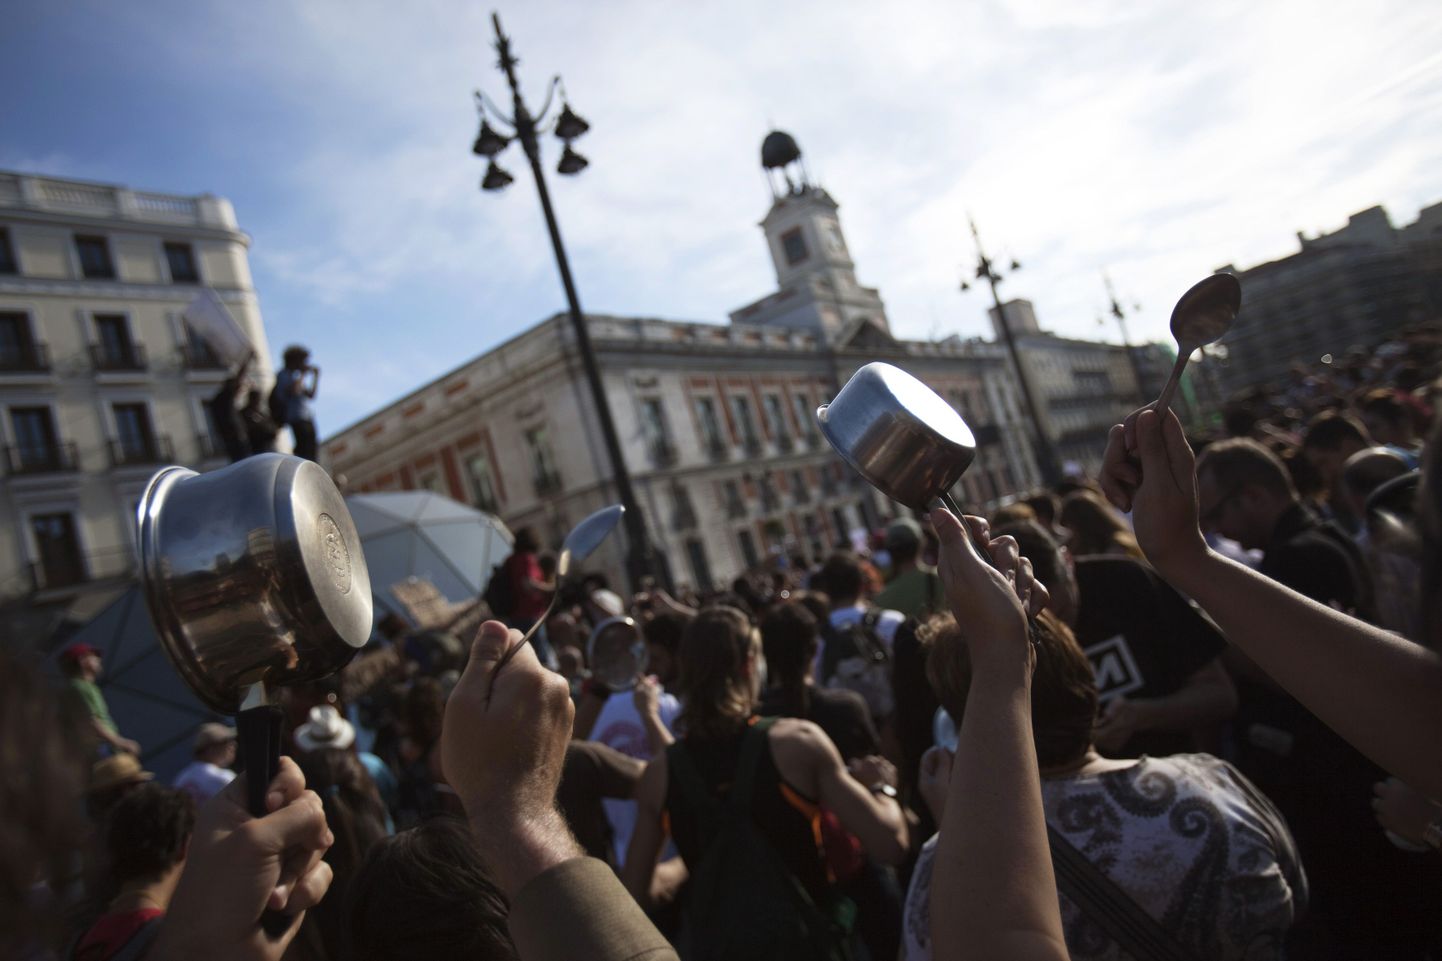 People banging on saucepans with spoons shout slogans during a gathering marking the one year anniversary of Spain's Indignados (Indignant) movement in Madrid's Puerta del Sol May 15, 2012. Dubbed "los indignados" (the indignant), the movement which spawned similar protests worldwide, has called for 96 hours of continuous protest to culminate at the Puerta del Sol square where the movement was founded a year ago in a renewed protest over government austerity measures, banks, politicians, economic recession, and the highest unemployment in the eurozone. REUTERS/Juan Medina(SPAIN - Tags: CIVIL UNREST POLITICS SOCIETY)